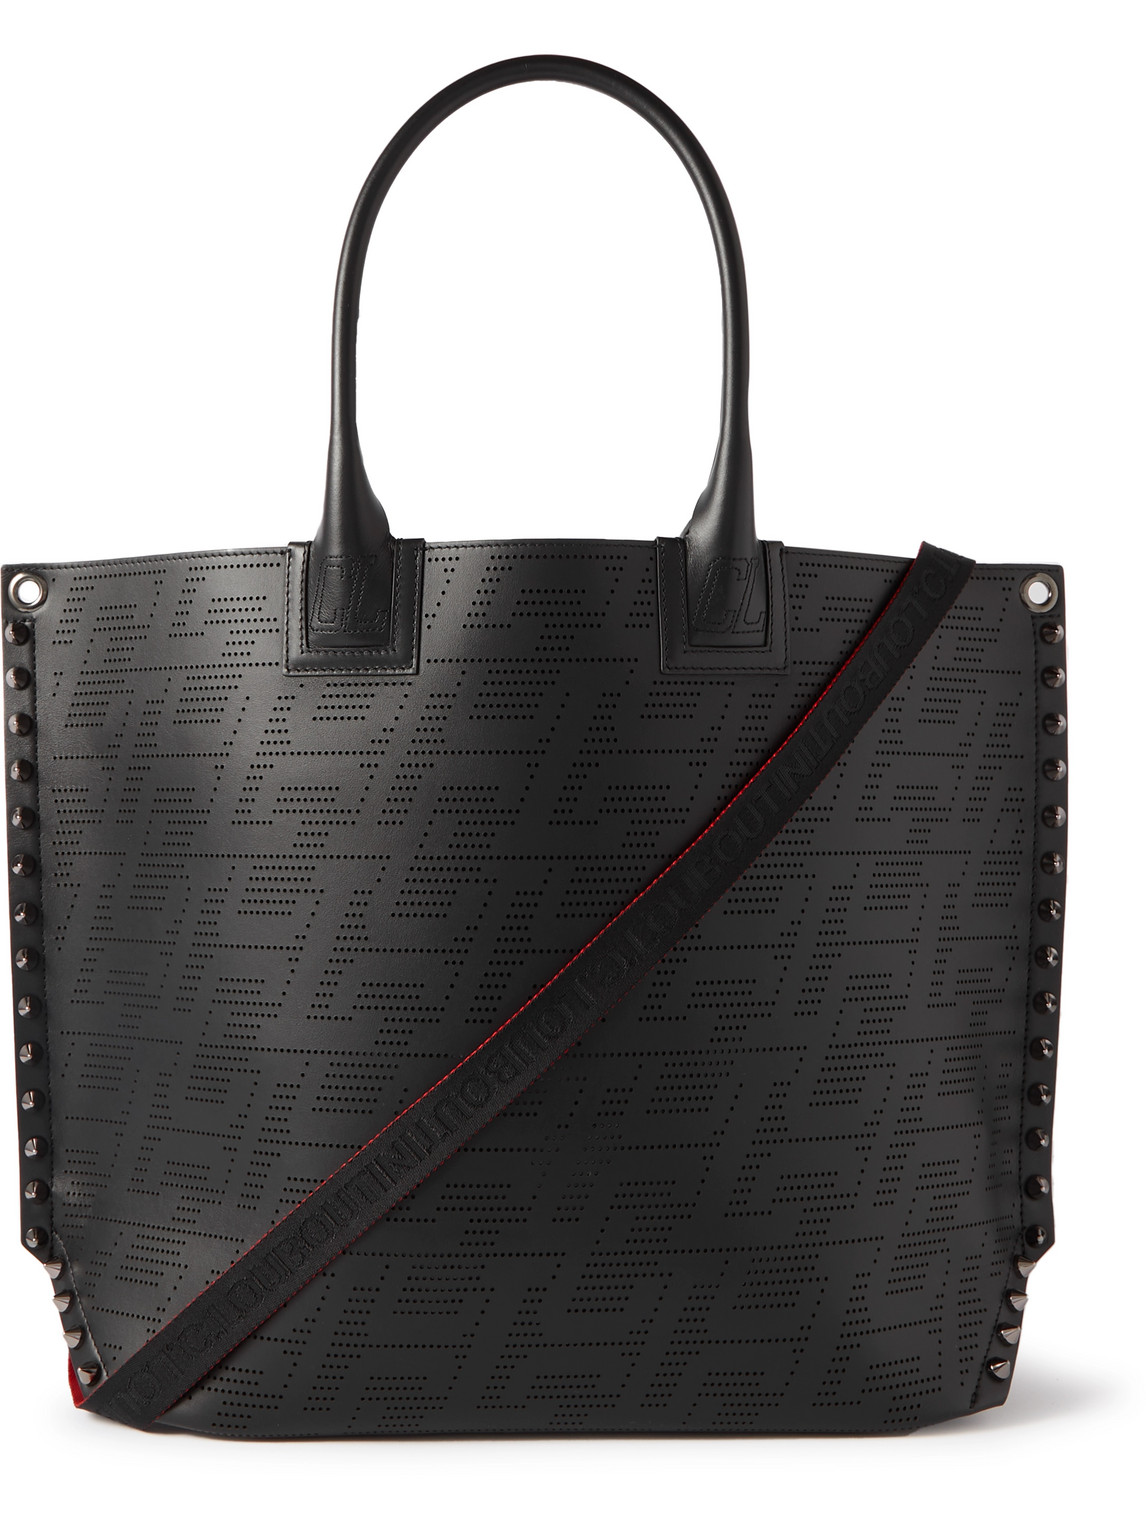 Christian Louboutin Cabalou Leather Spike Tote Bag In Black